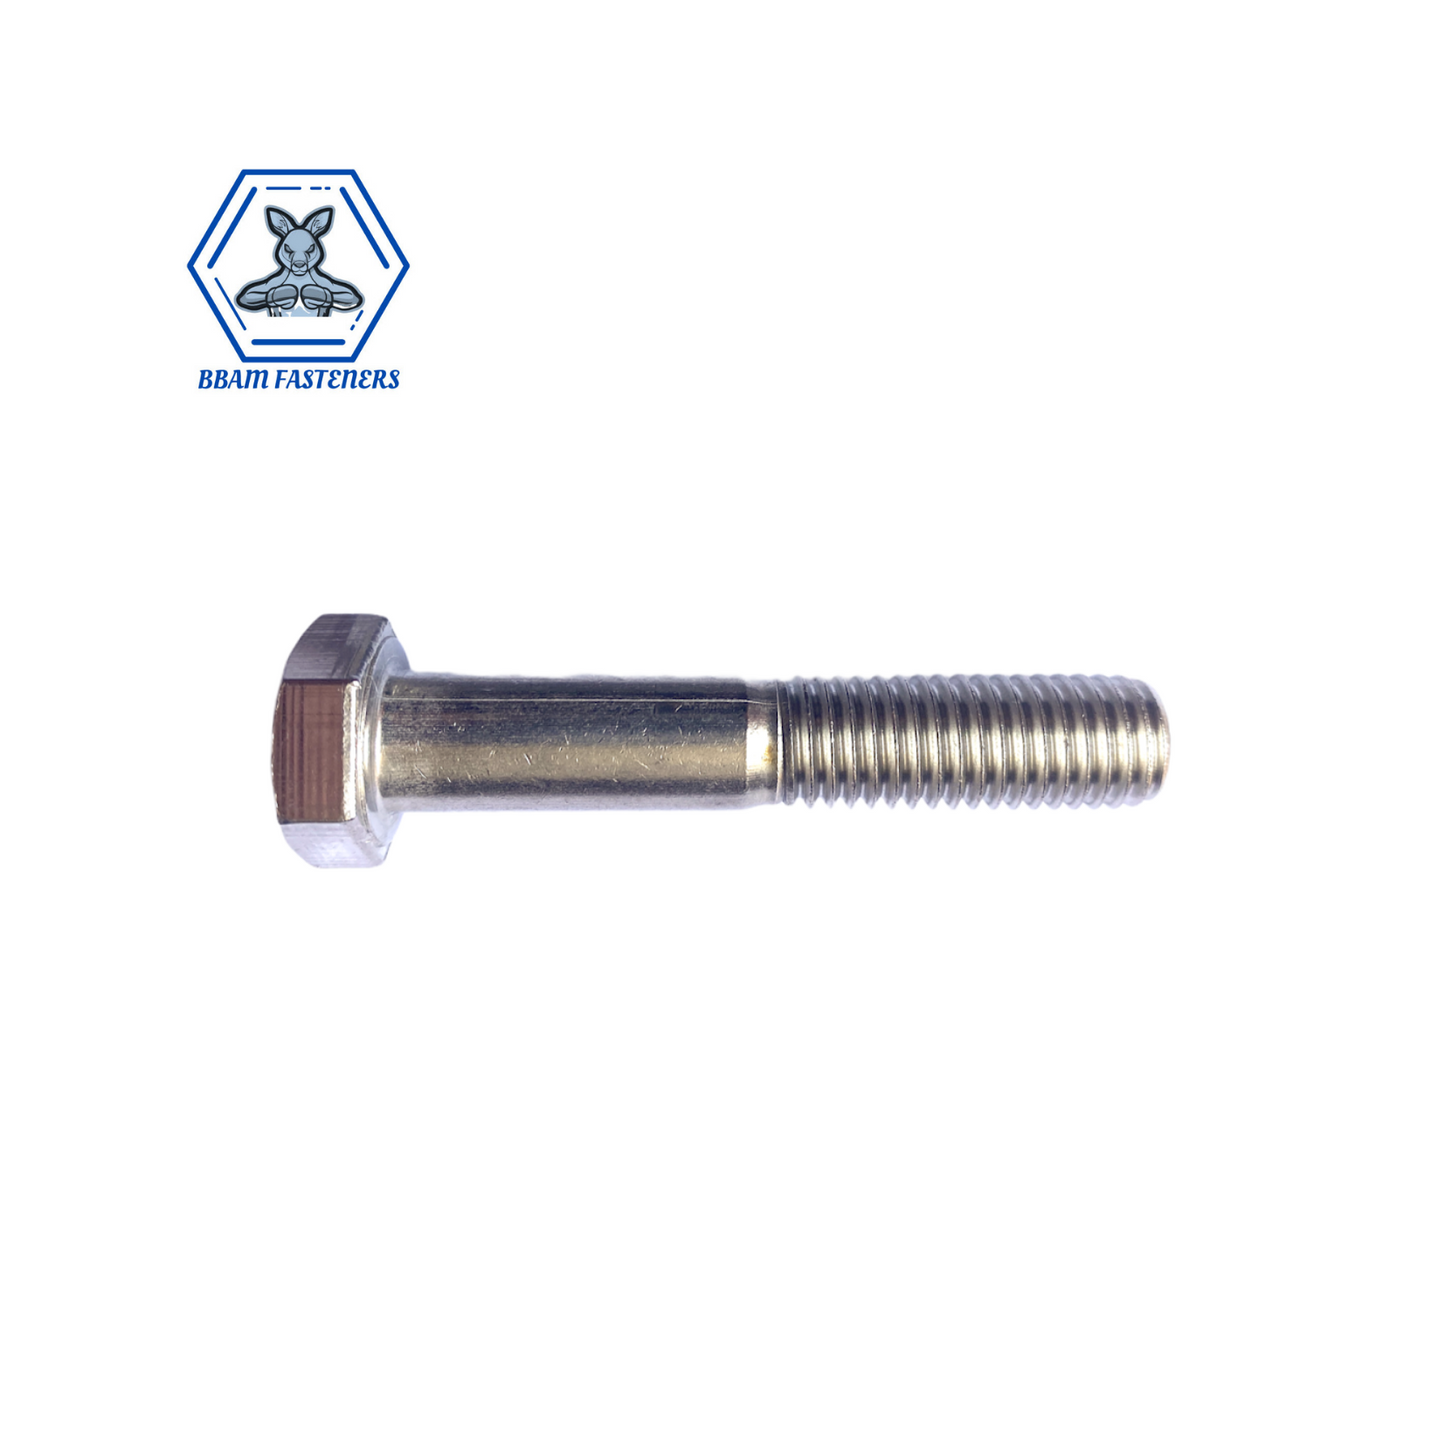 M8 x 75mm Hex Bolt 304 Stainless Steel